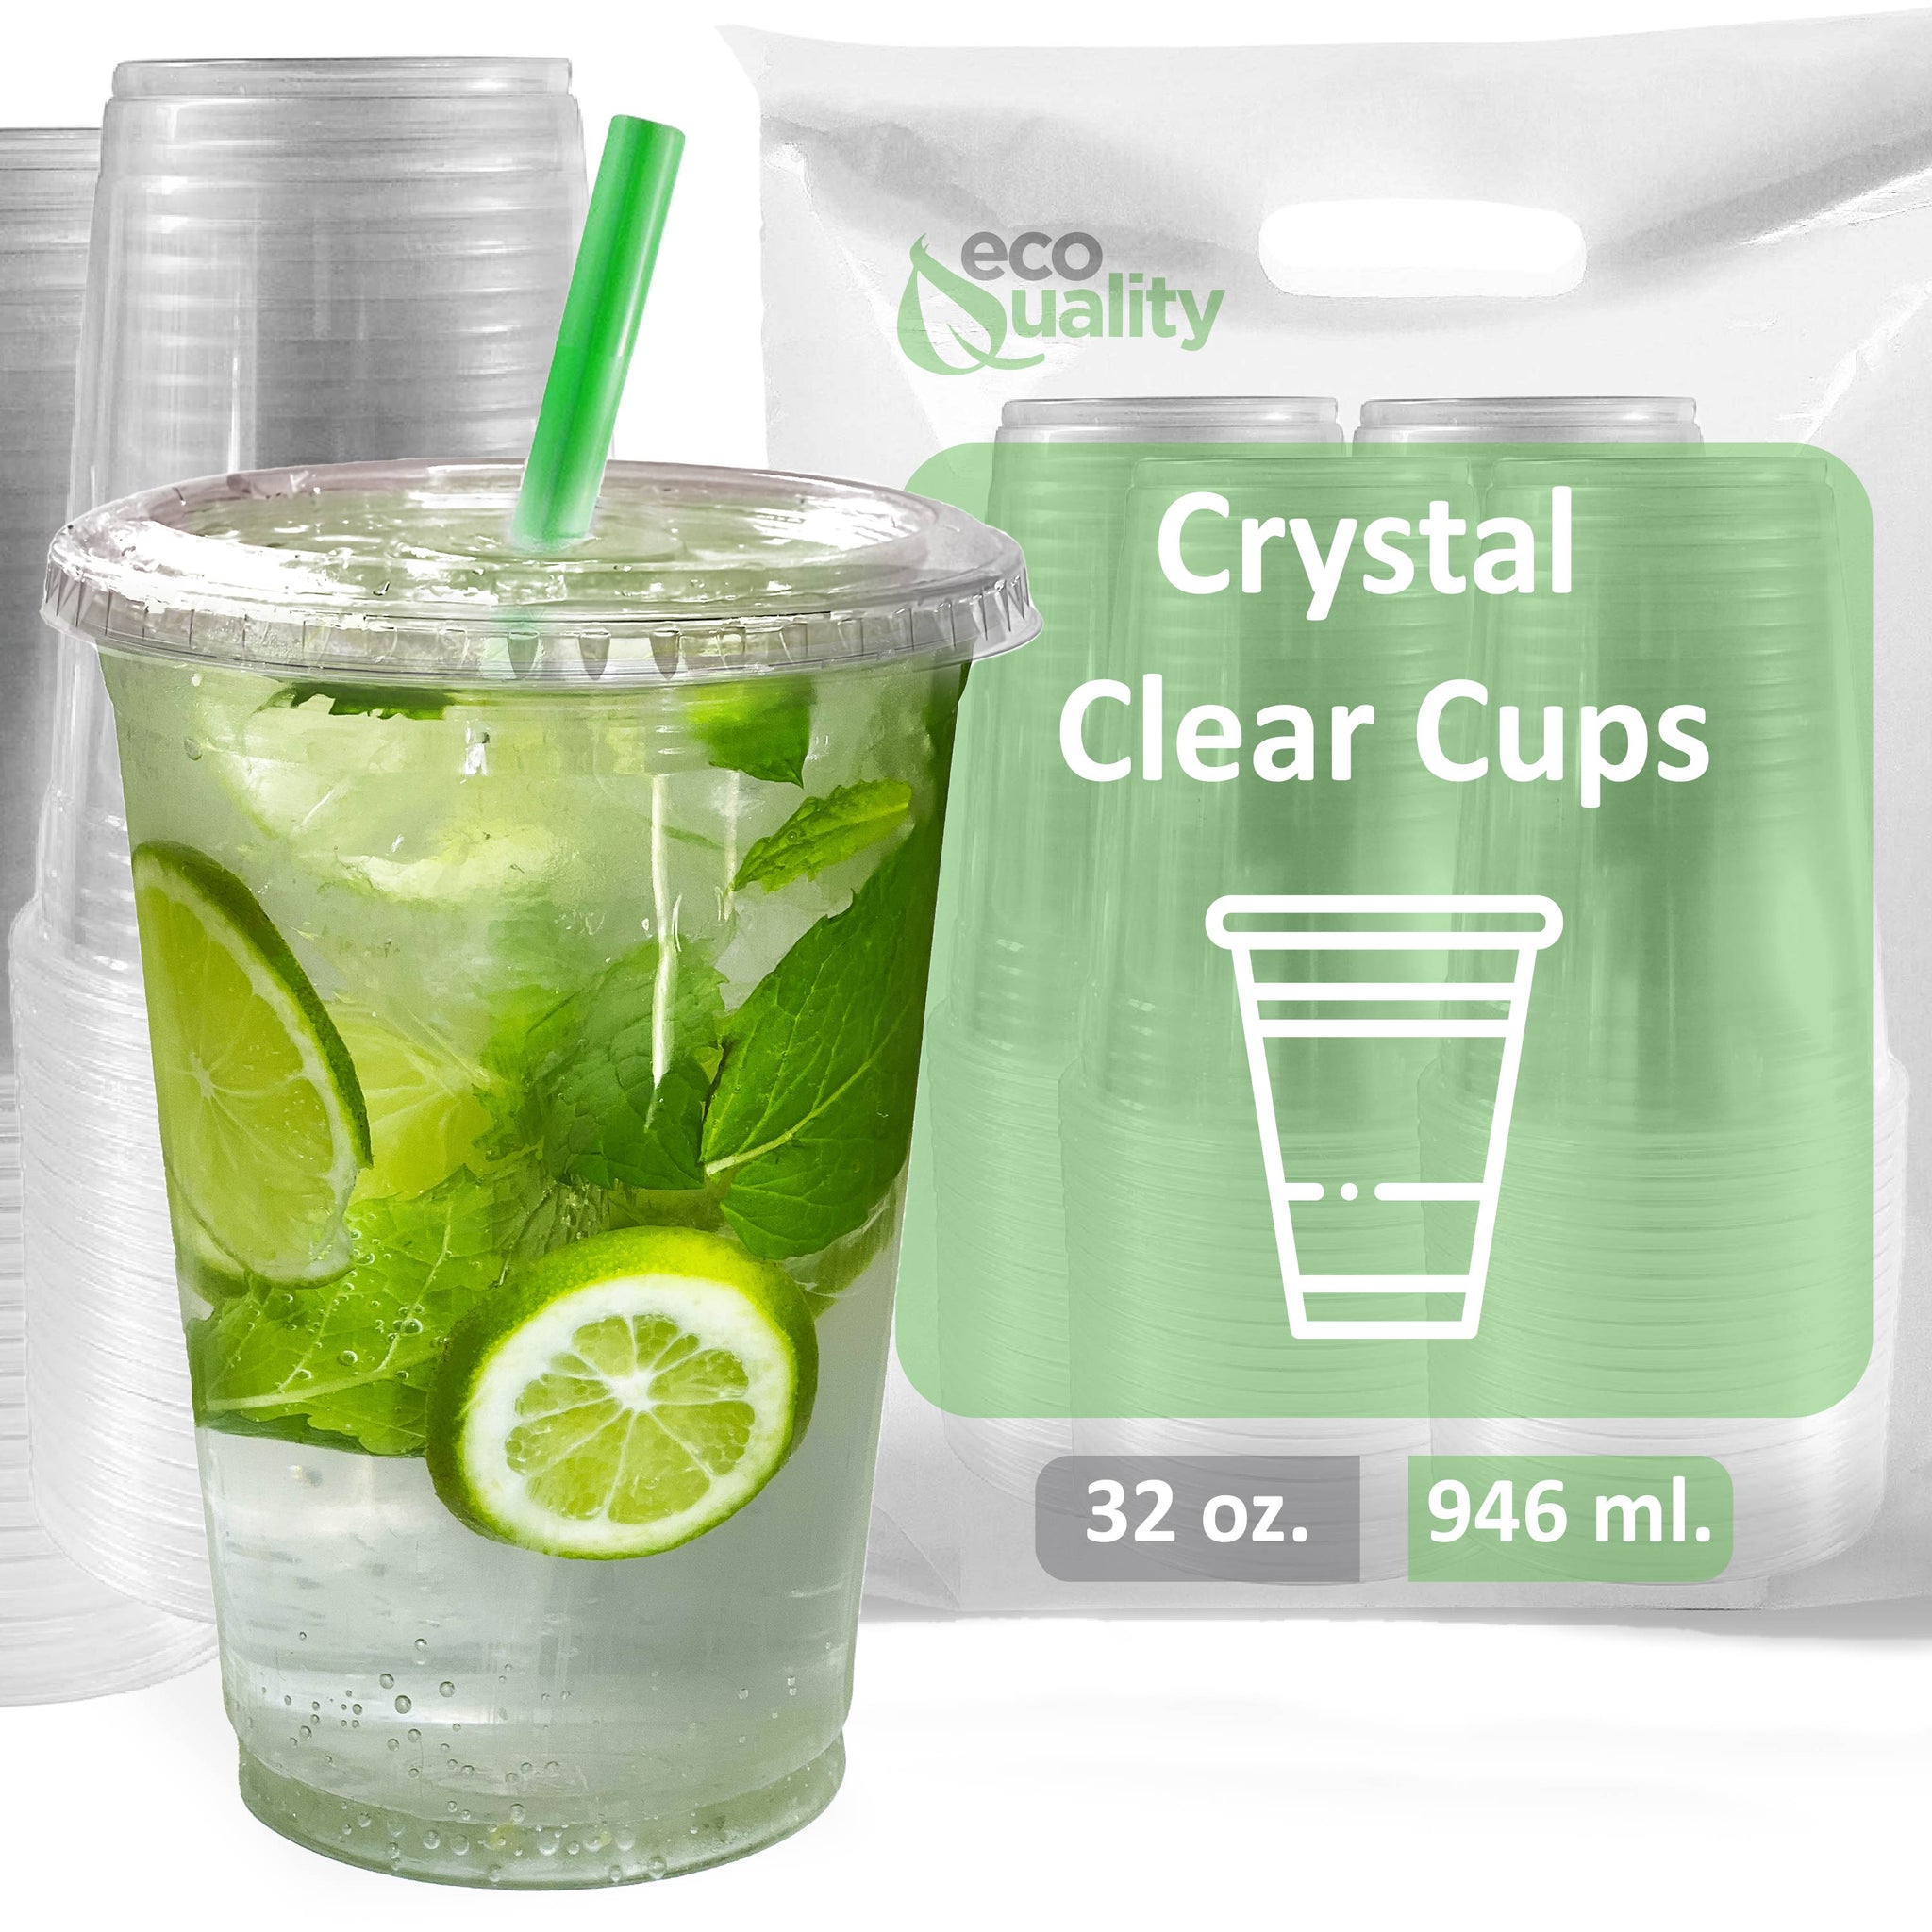 32oz Disposable Pet Clear Plastic Smoothie Cups with Clear Flat Lids with Color Straws